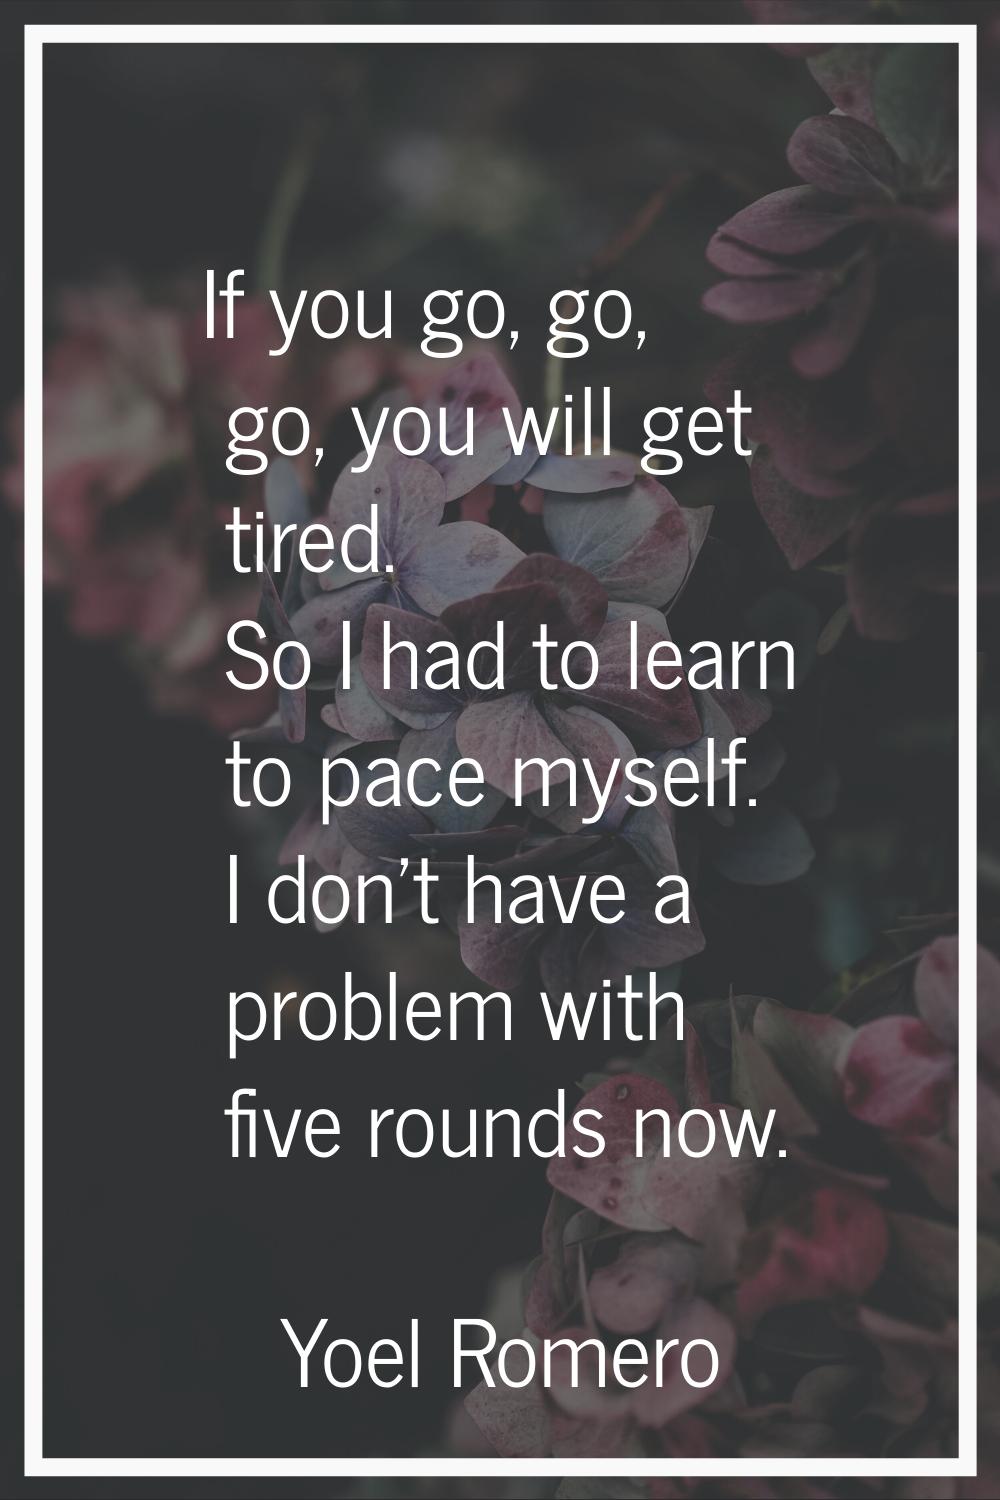 If you go, go, go, you will get tired. So I had to learn to pace myself. I don't have a problem wit